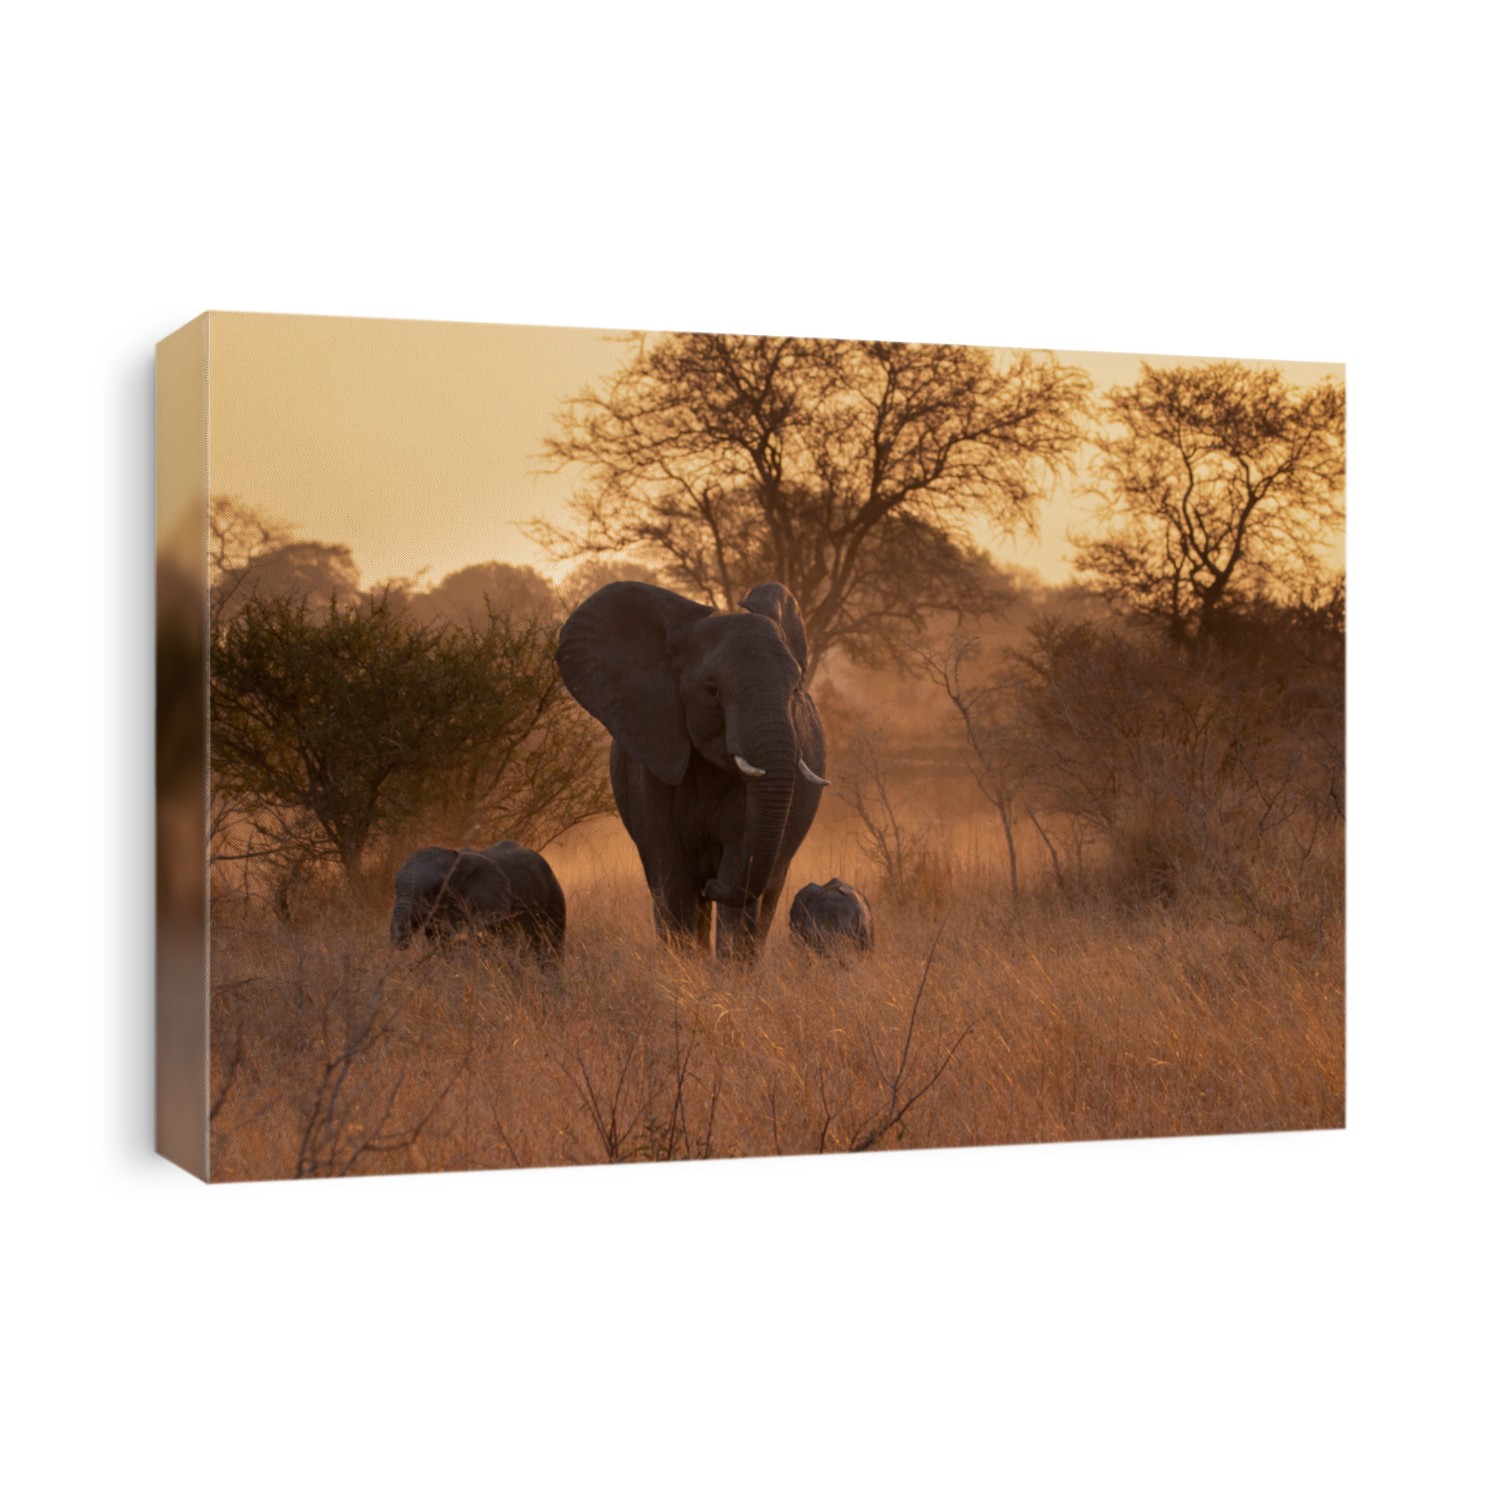 African Elephants in the dusty sunset.